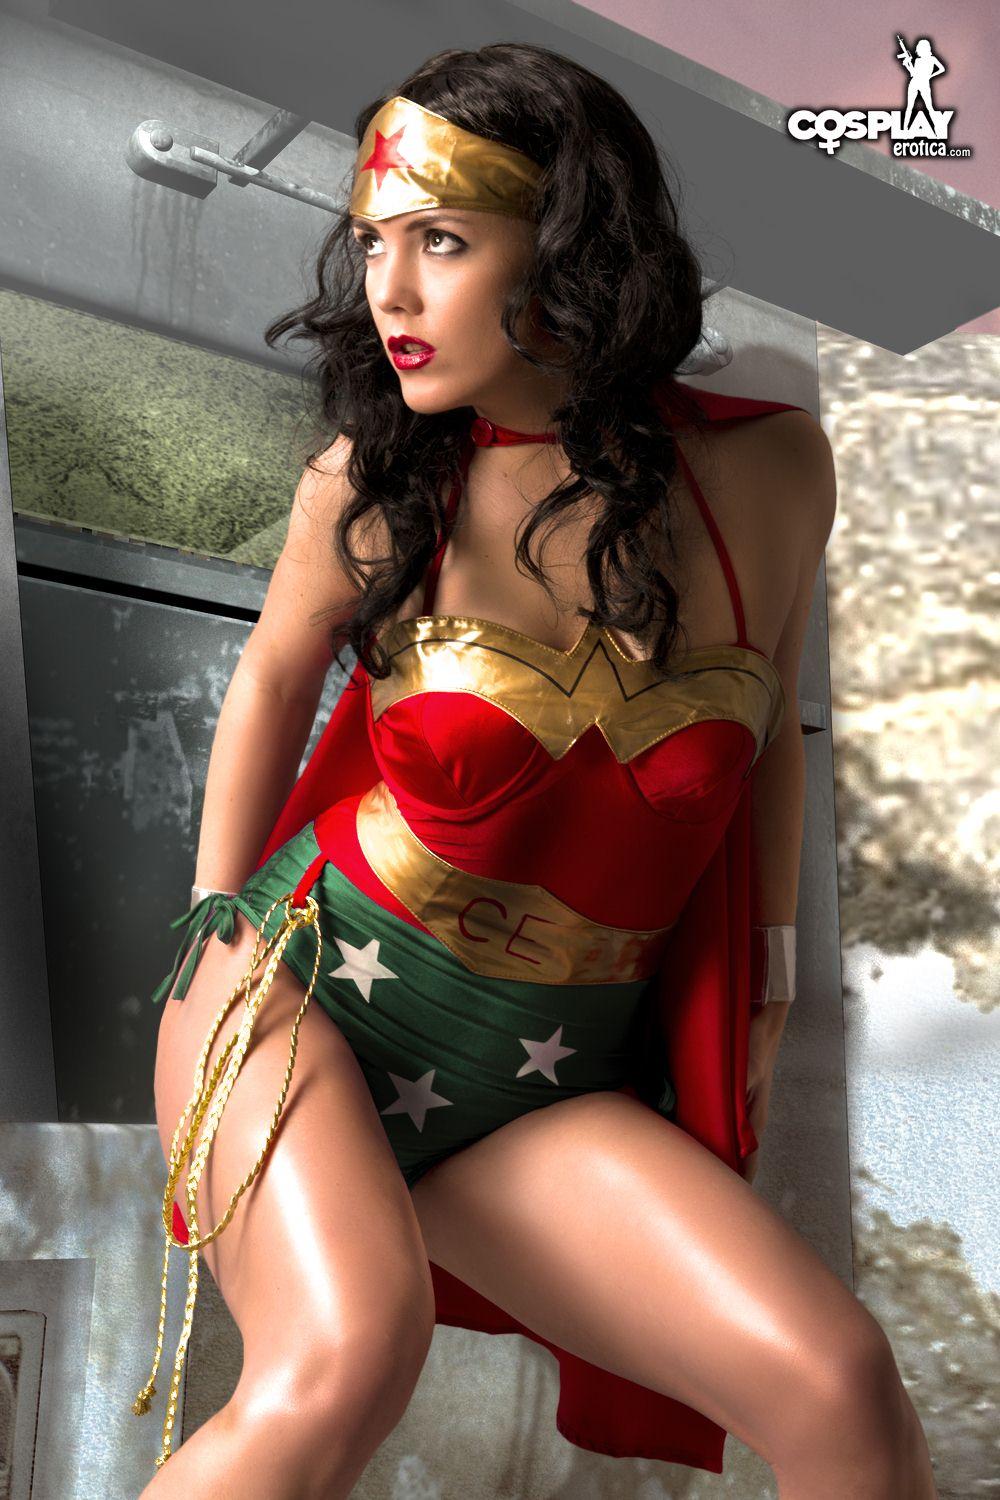 Pictures of stunning cosplayer Gogo dressed up as Wonder Woman #54559998